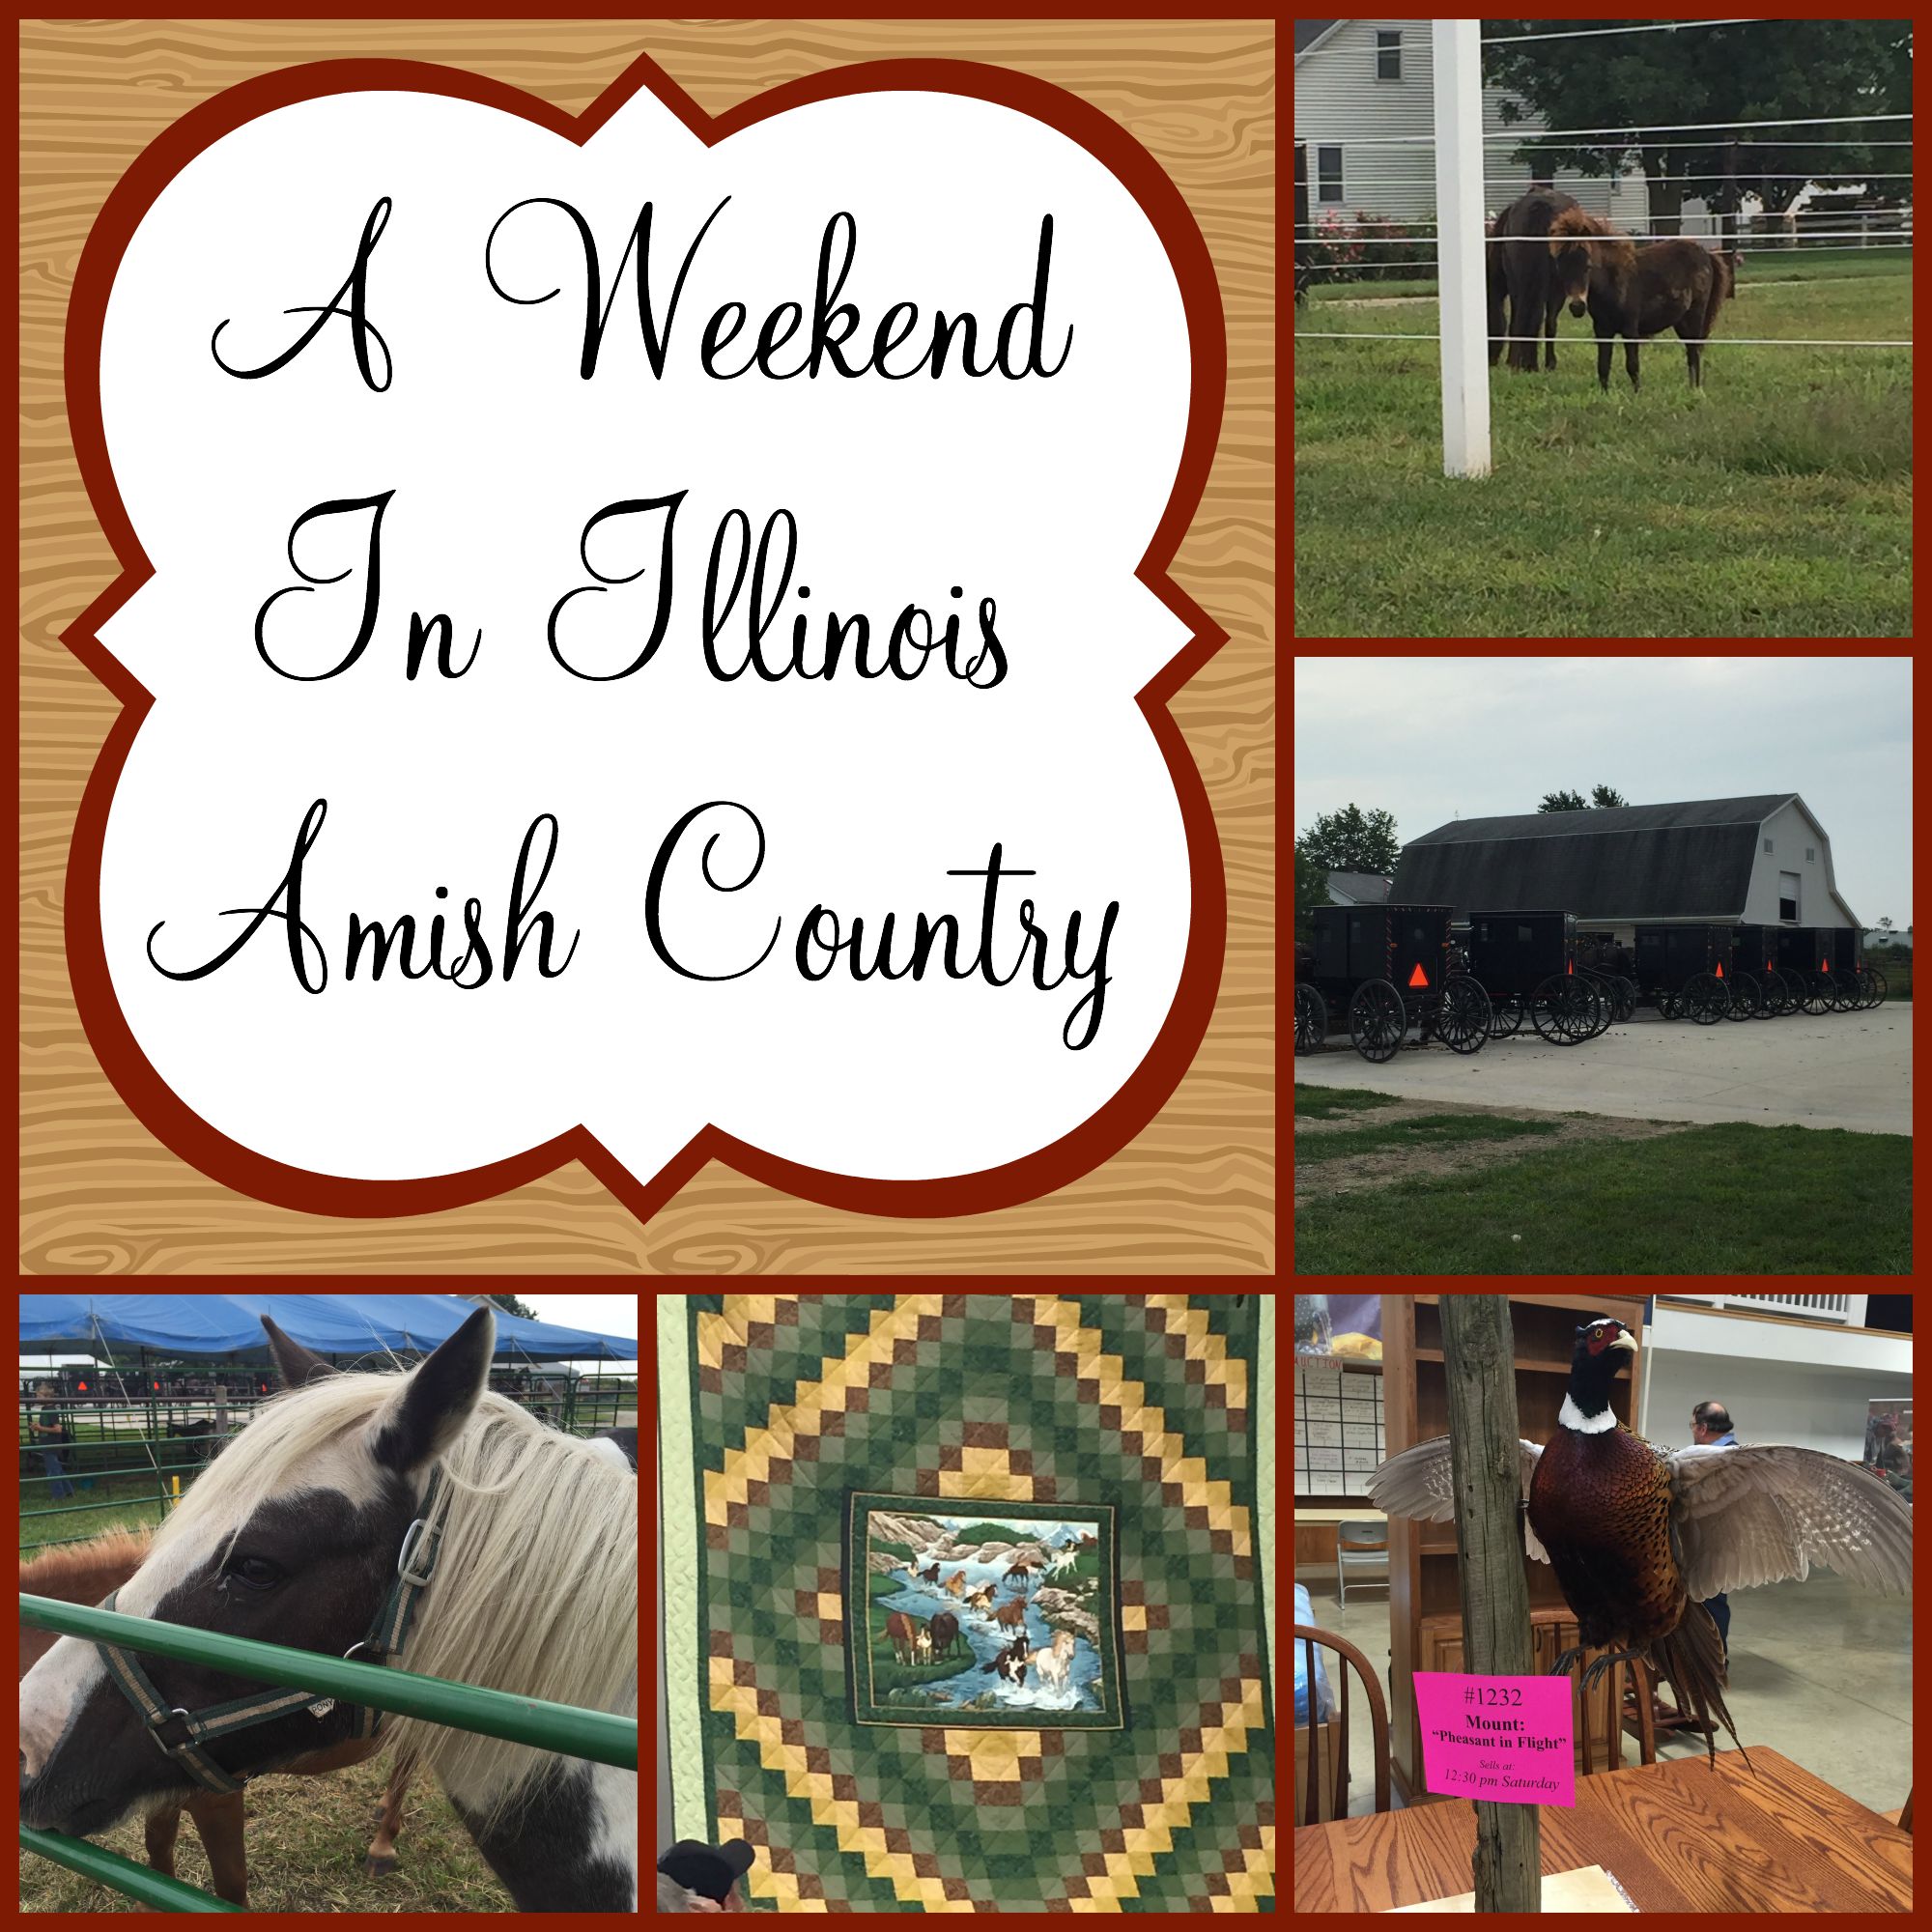 A Weekend in Illinois Amish Country